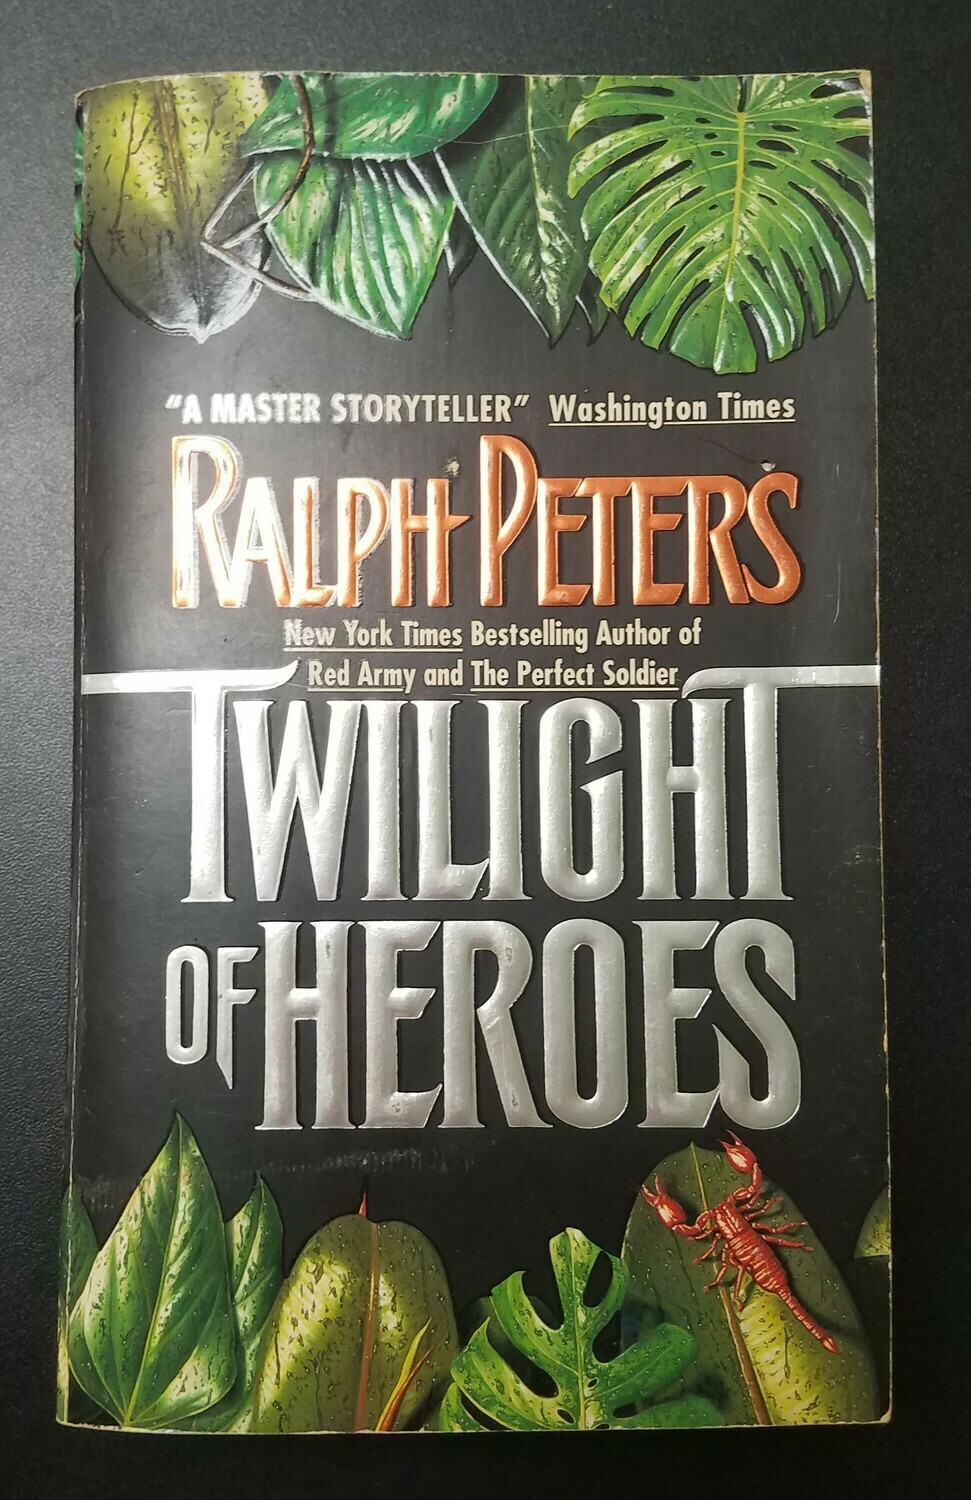 Twilight of Heroes by Ralph Peters